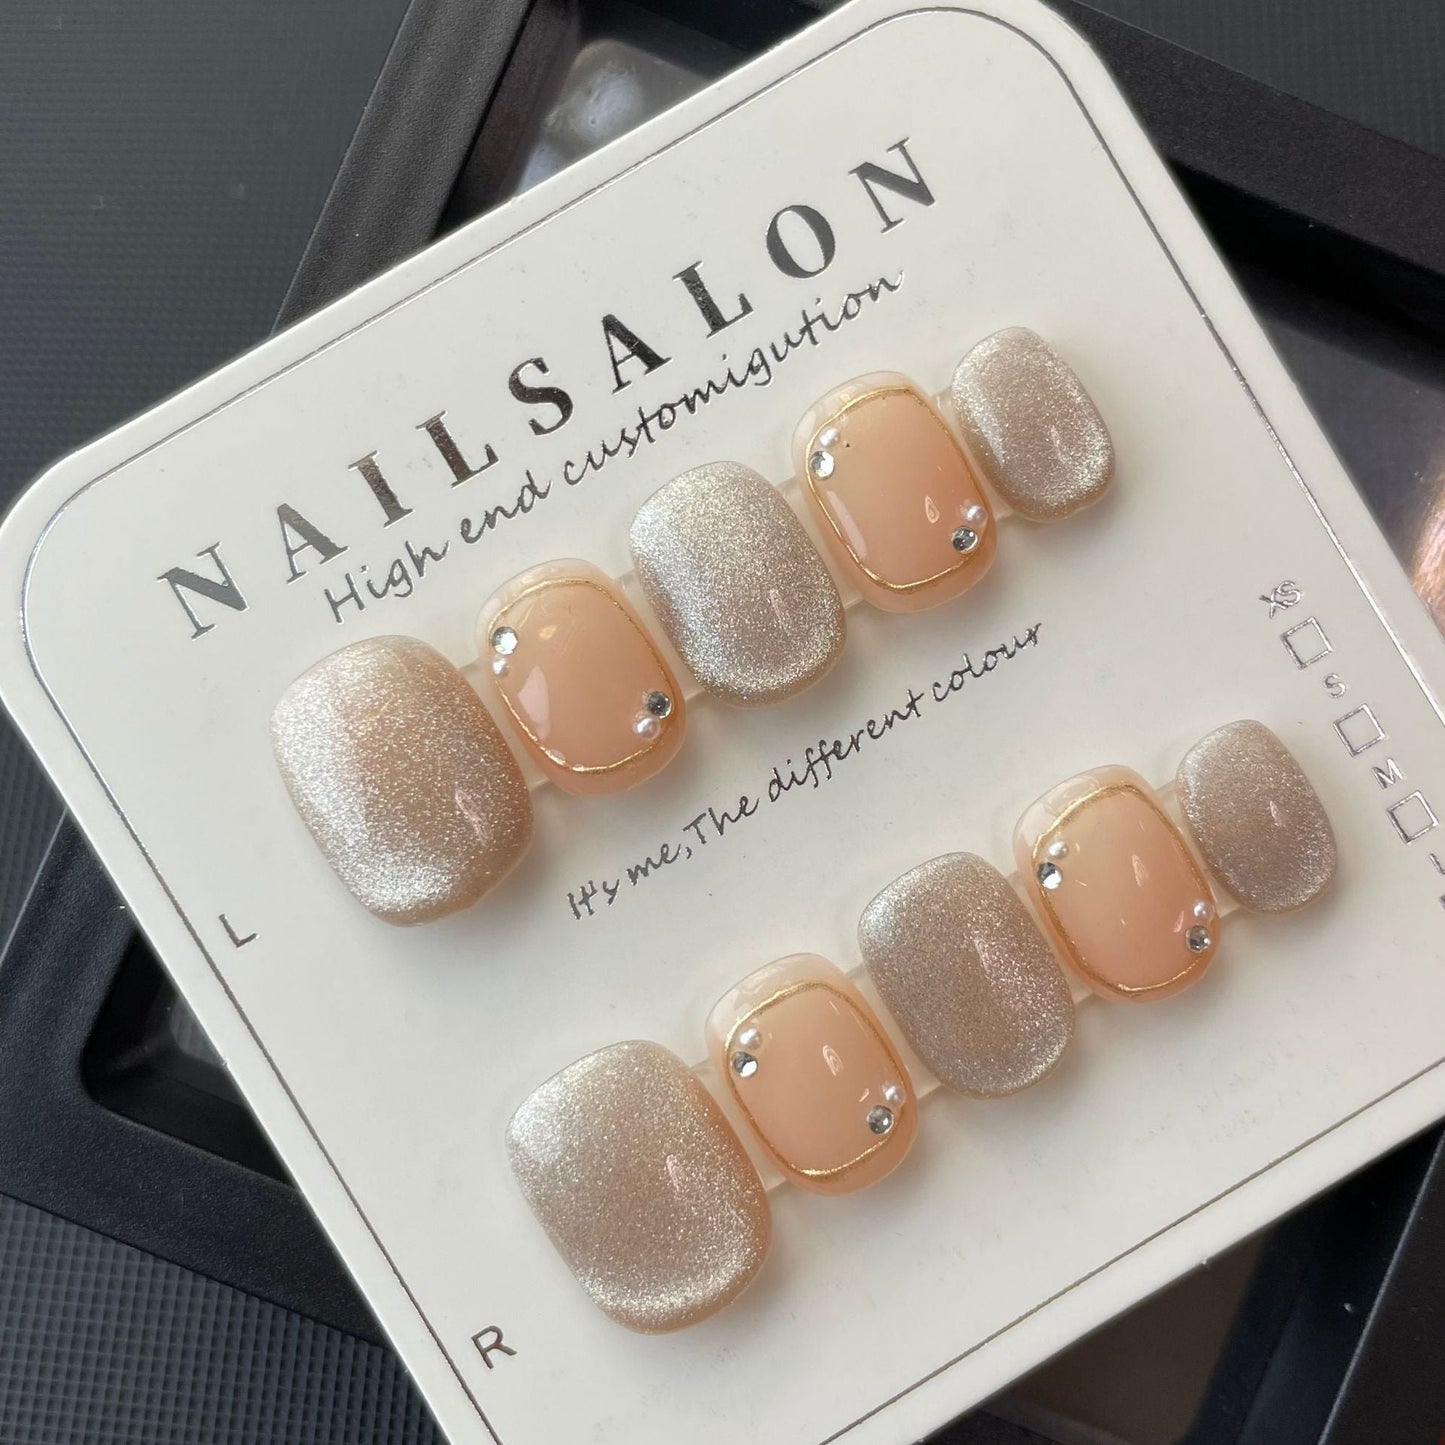 727 Cateye Effect style press on nails 100% handmade false nails nude color